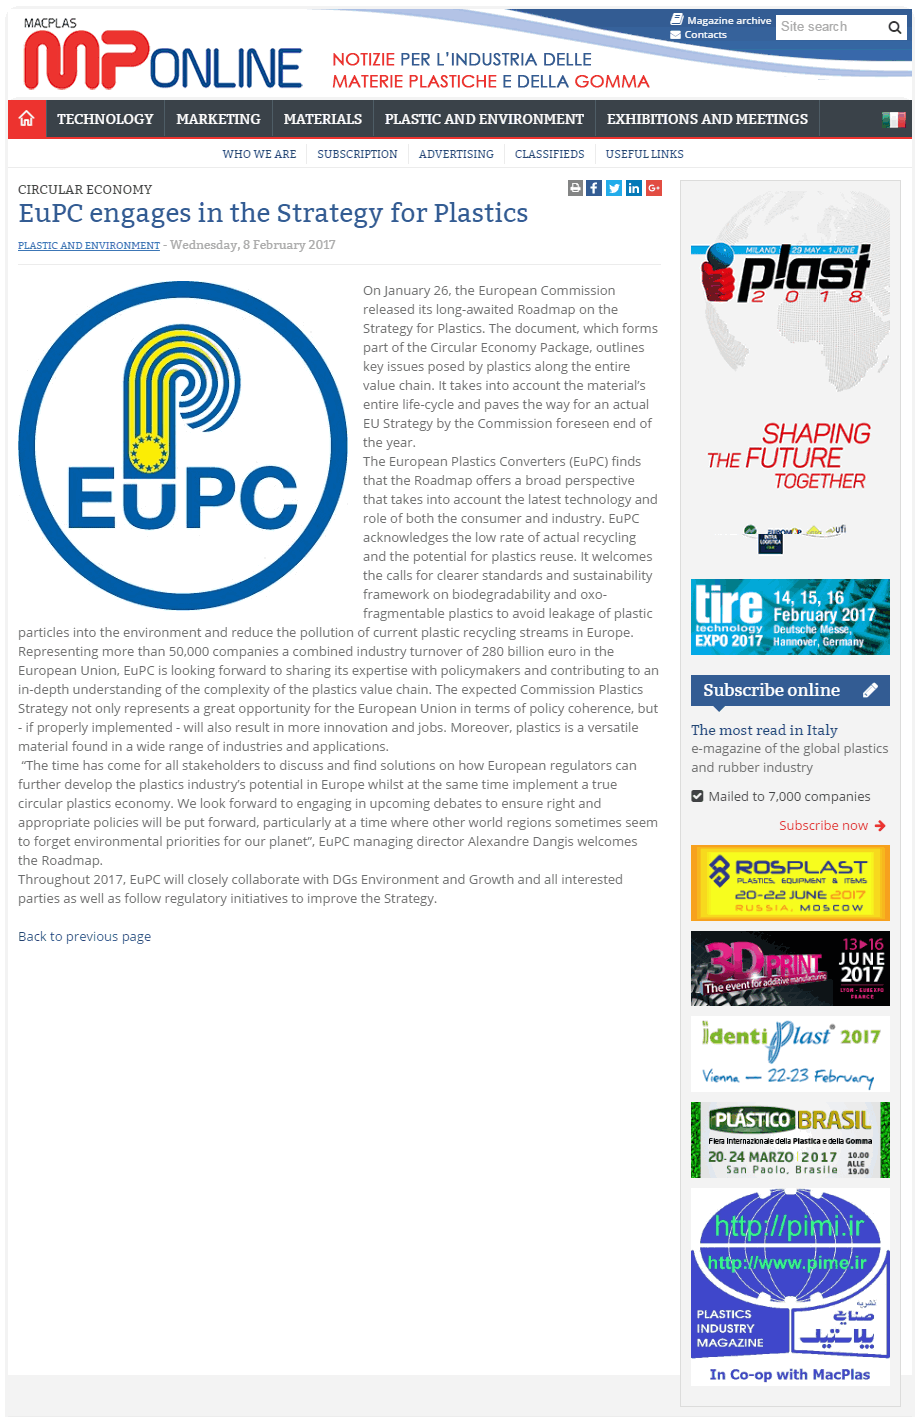 EuPC Engages in the Strategy for Plastics